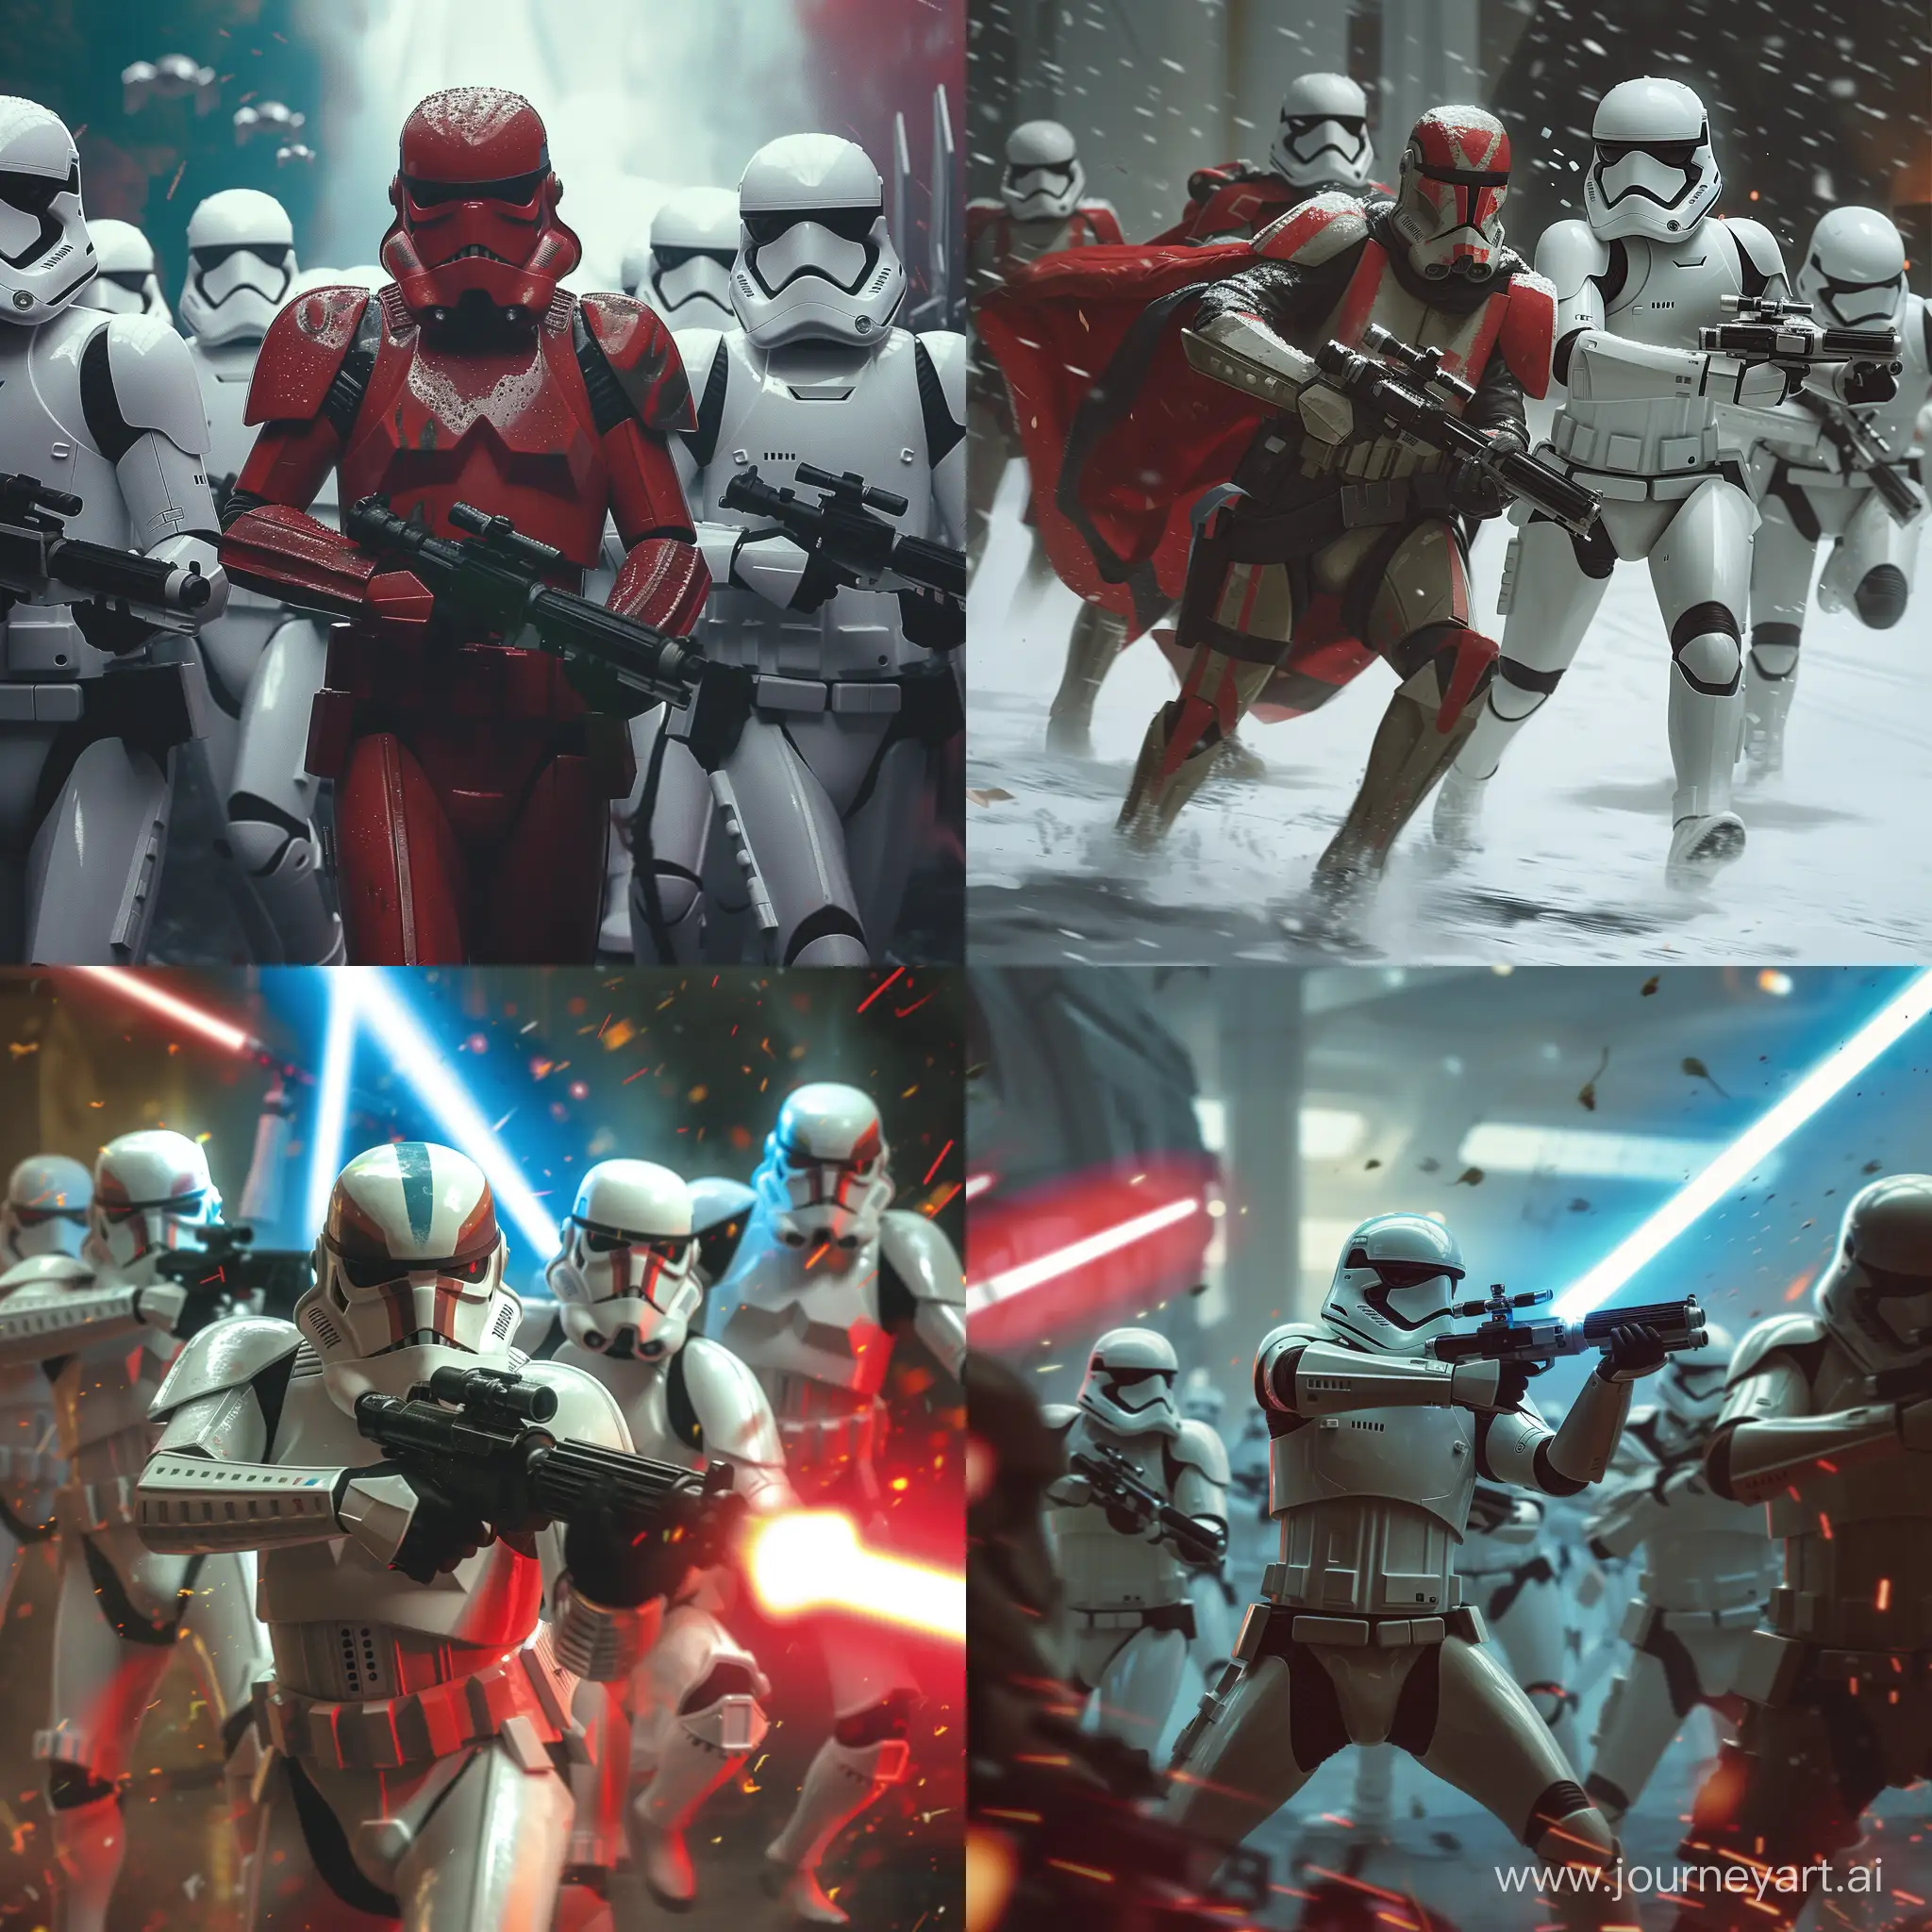 Epic-Battle-Republic-Clones-Clash-with-Stormtroopers-in-Star-Wars-Universe